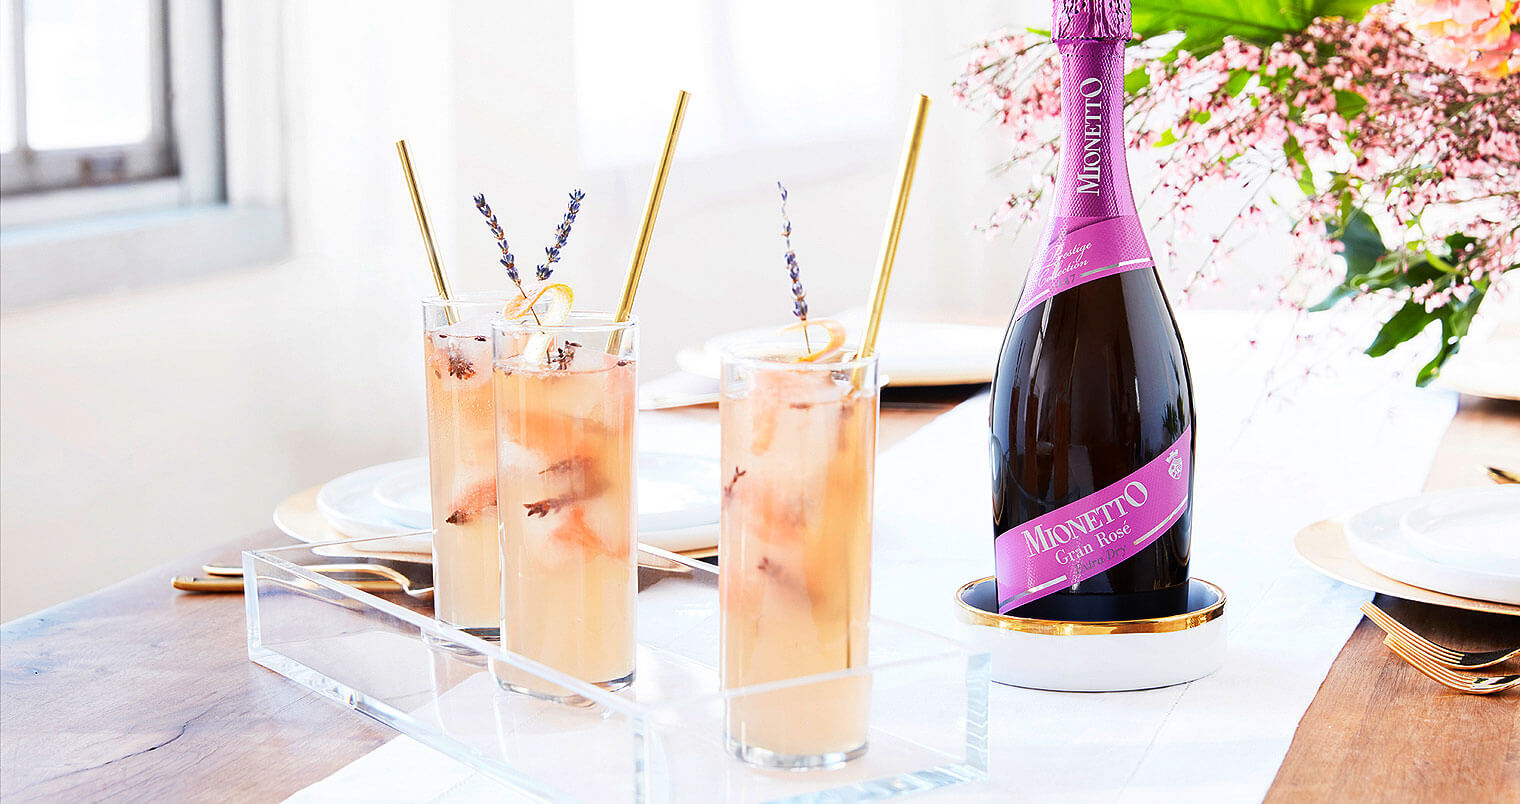 Hold on to Summer with Prosecco, featured image